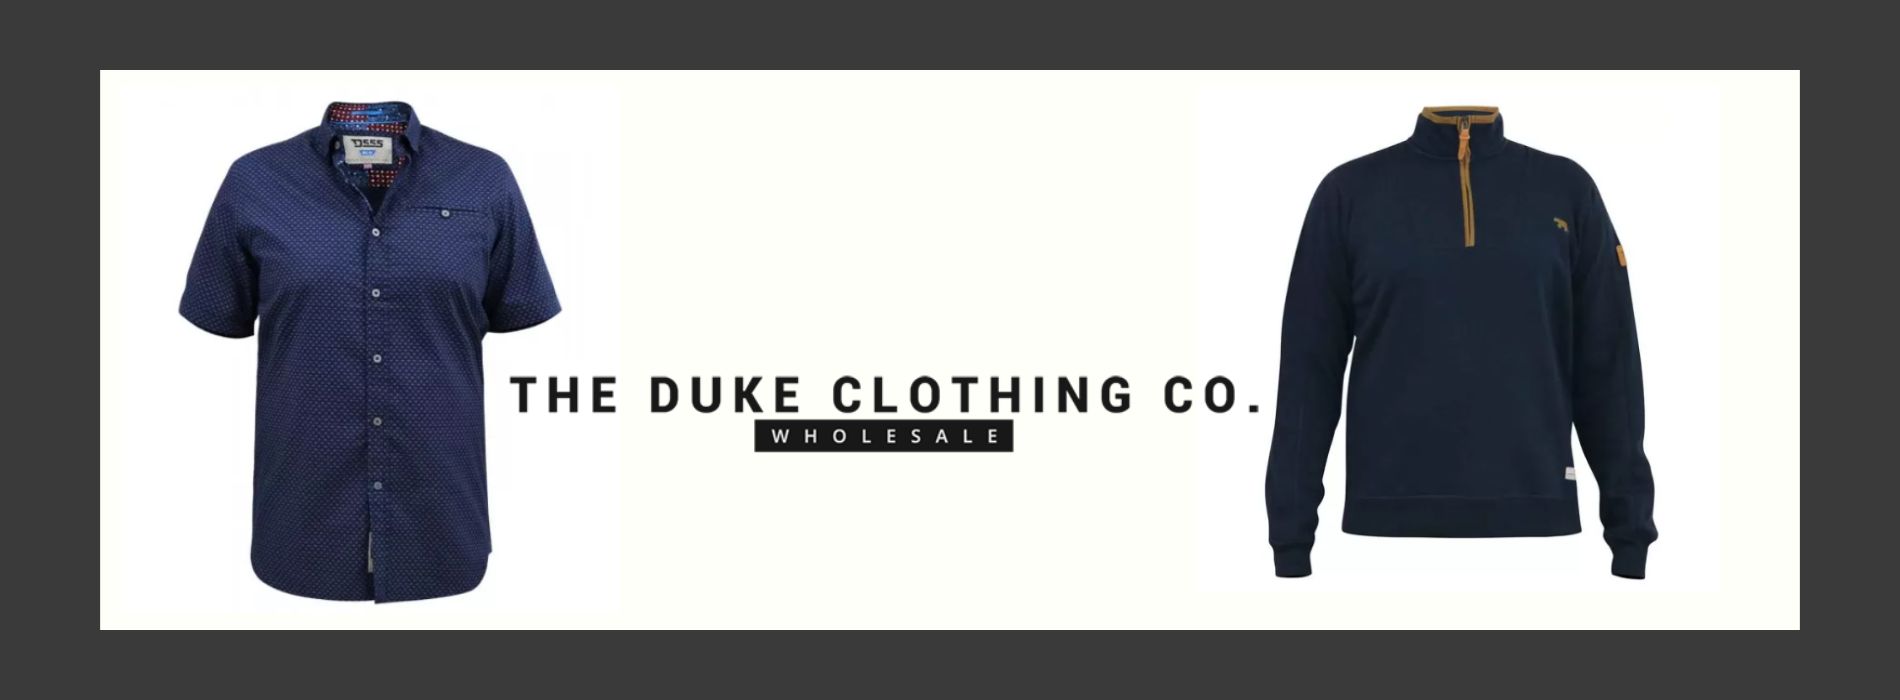 Wholesale Clothing Solution for Tall Men: Duke Clothing Comes to the Rescue!